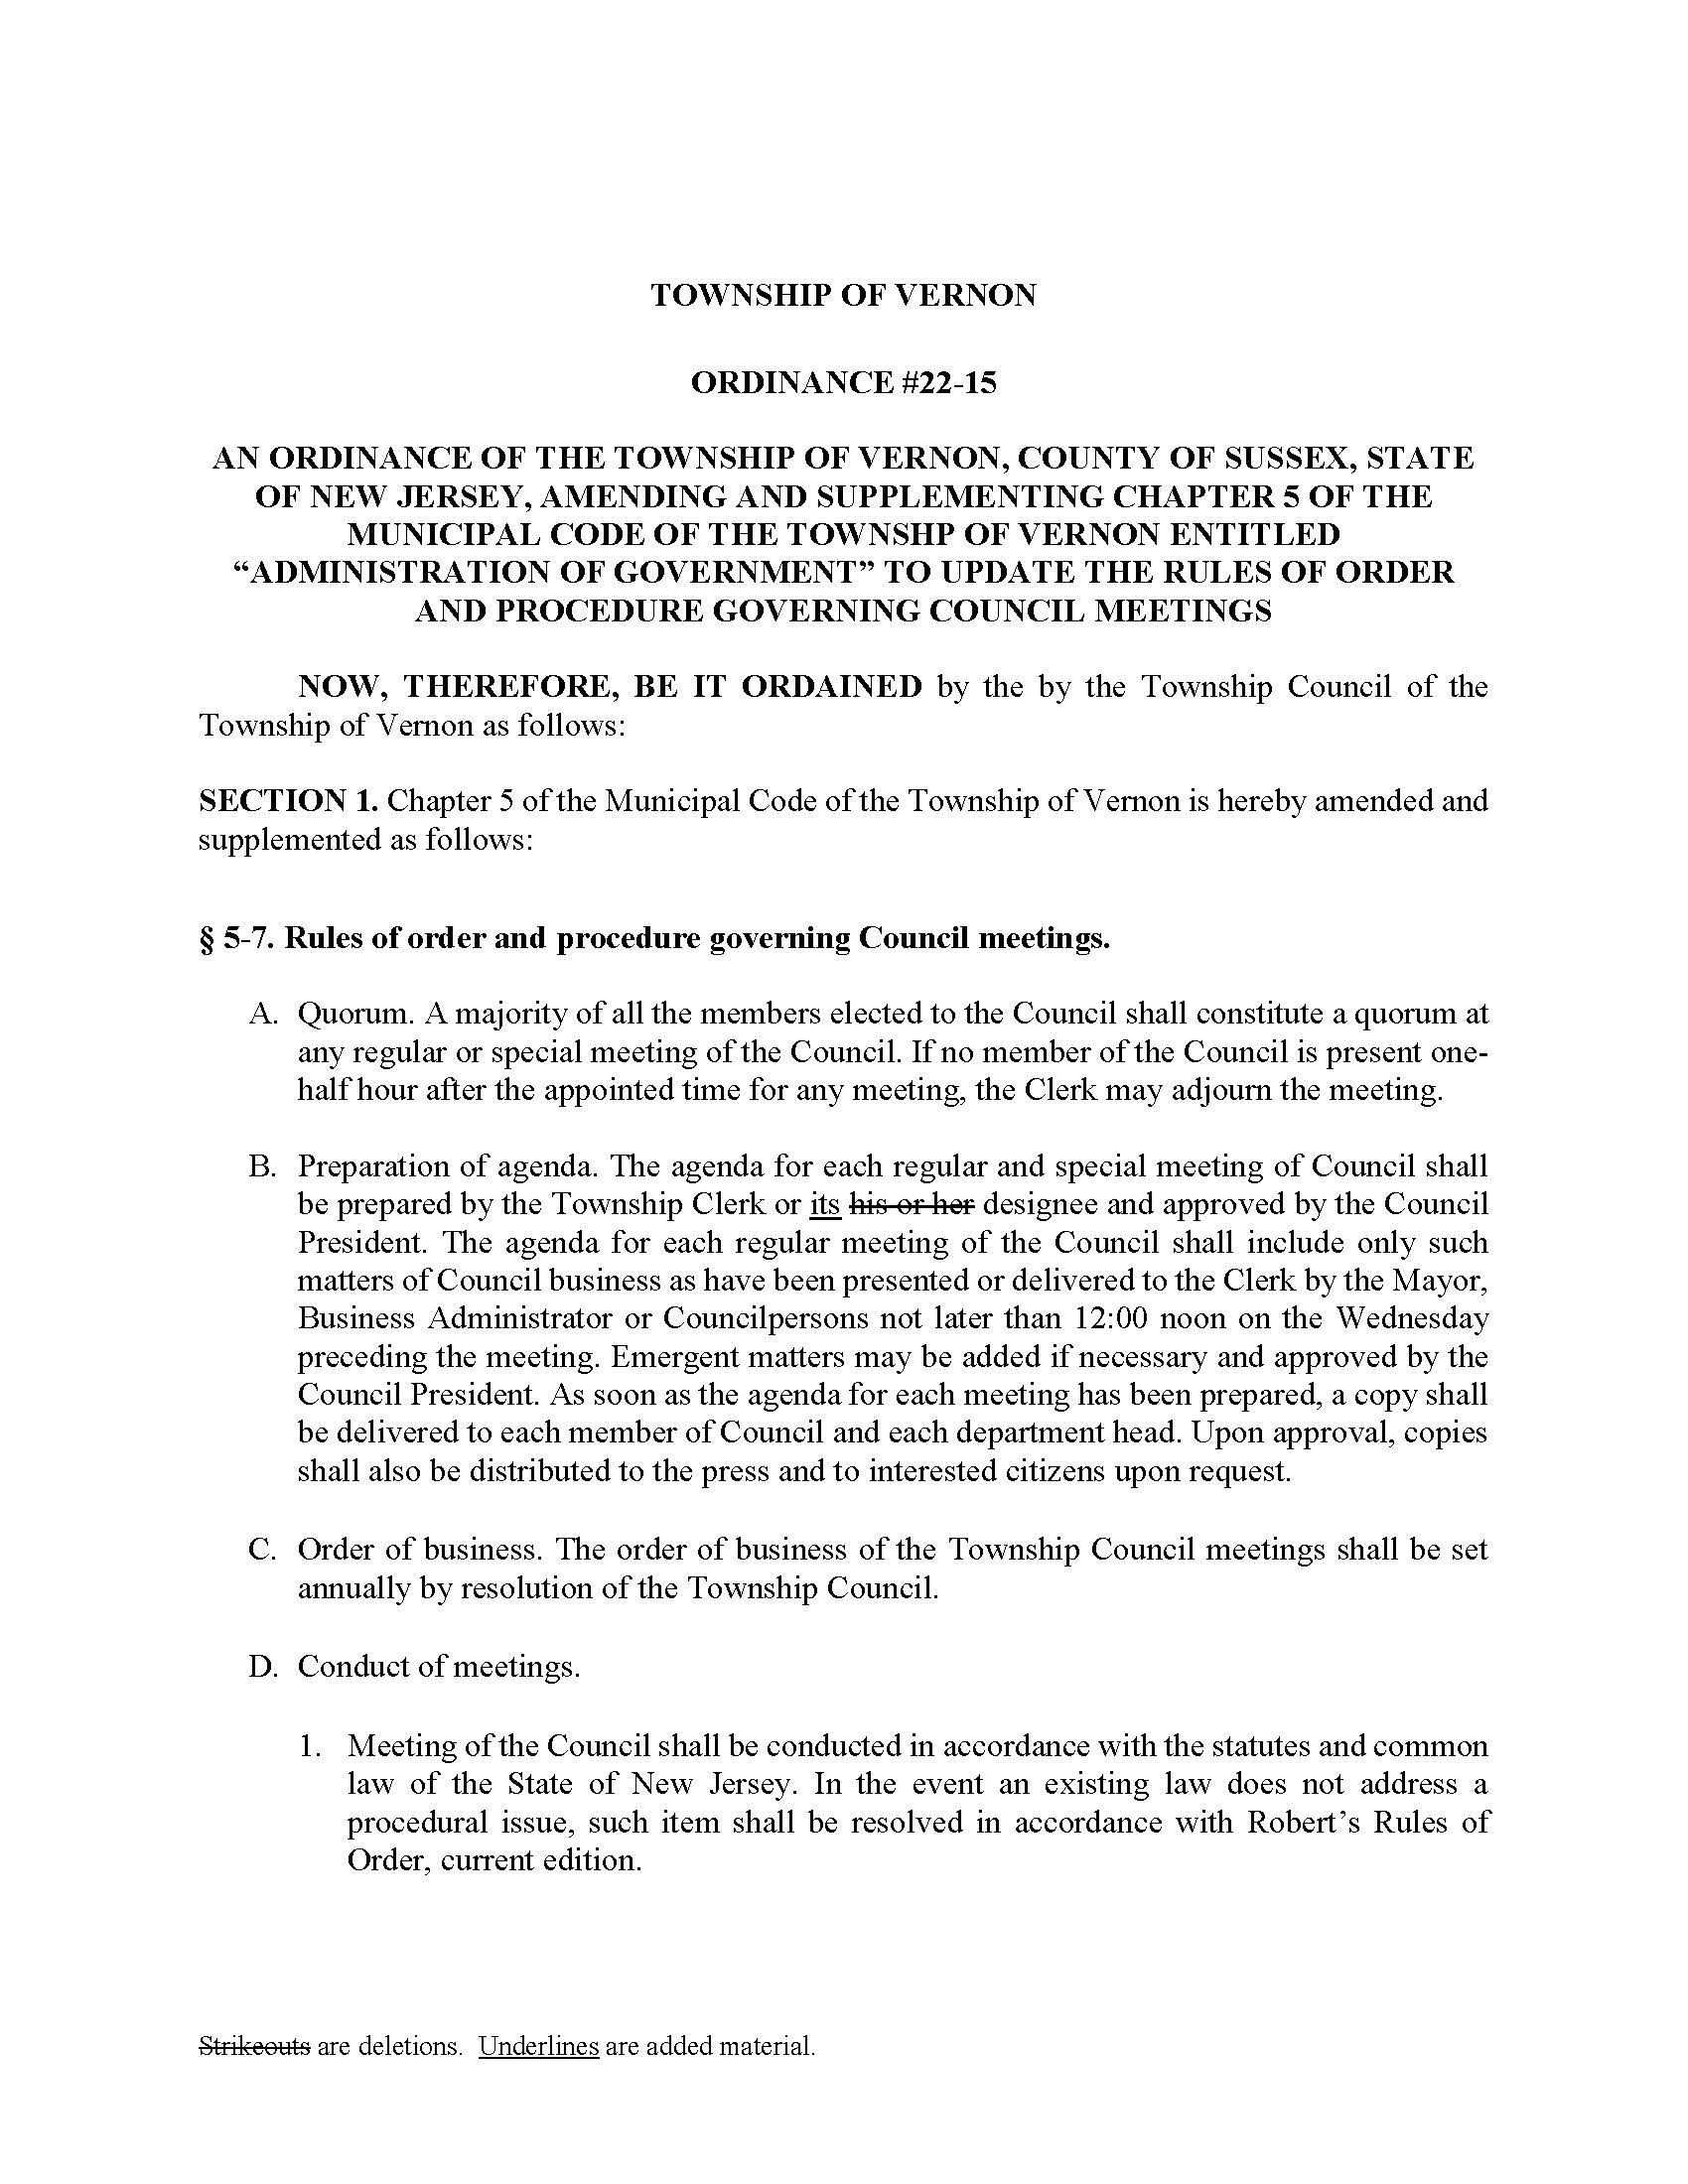 22 15 Revised Council Conduct Ordinance re Hybrid Meetings Page 1